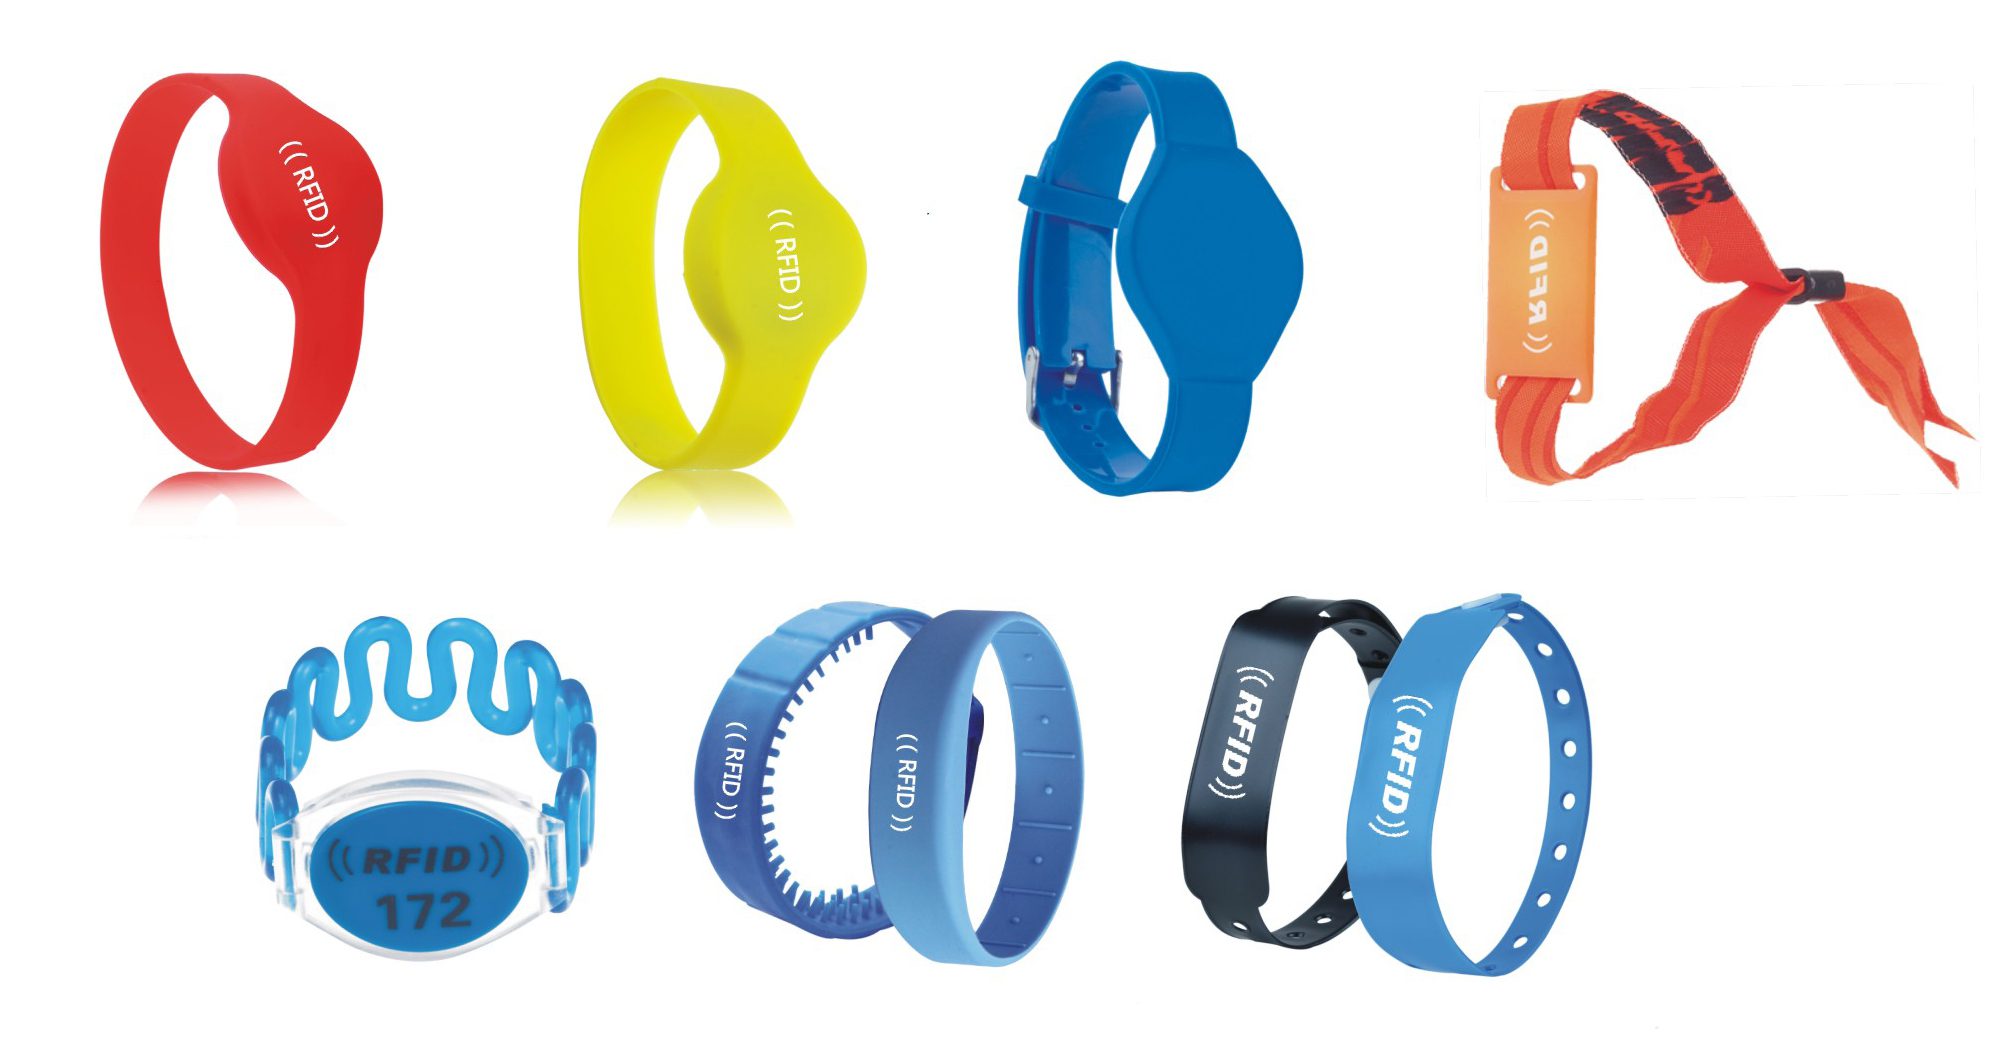 Featured image for “RFID Wristbands”